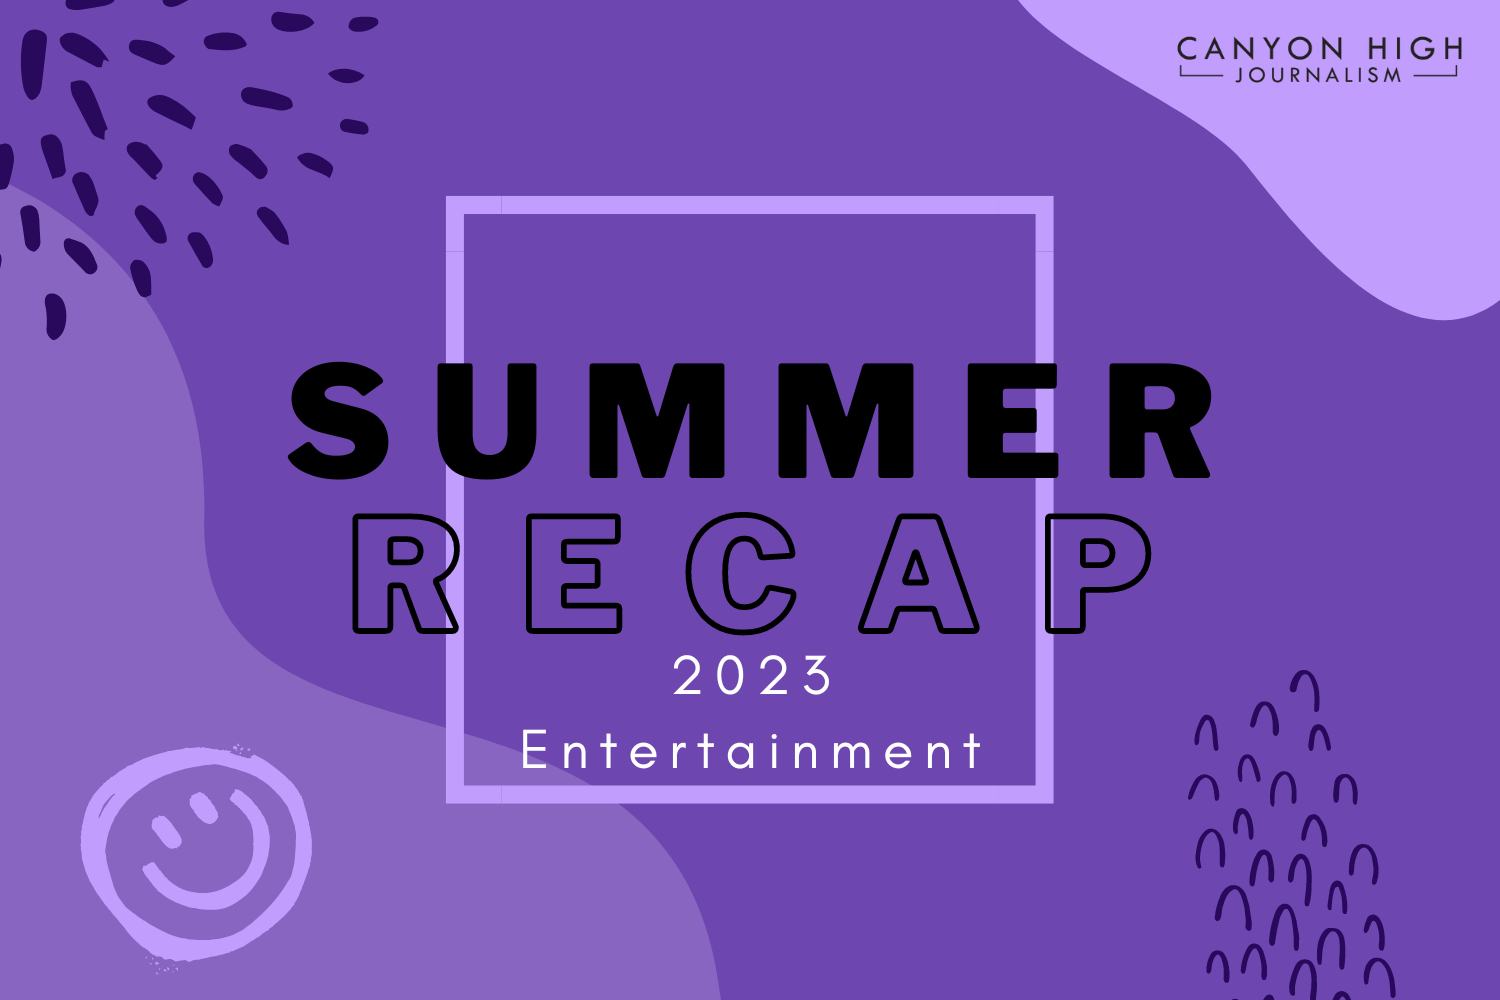 Editor-in-Chief, Sean Buck reflects on this past summer and some bigger key events that happened. Read along as he discusses Speak Now (Taylors Version), Barbie and more.